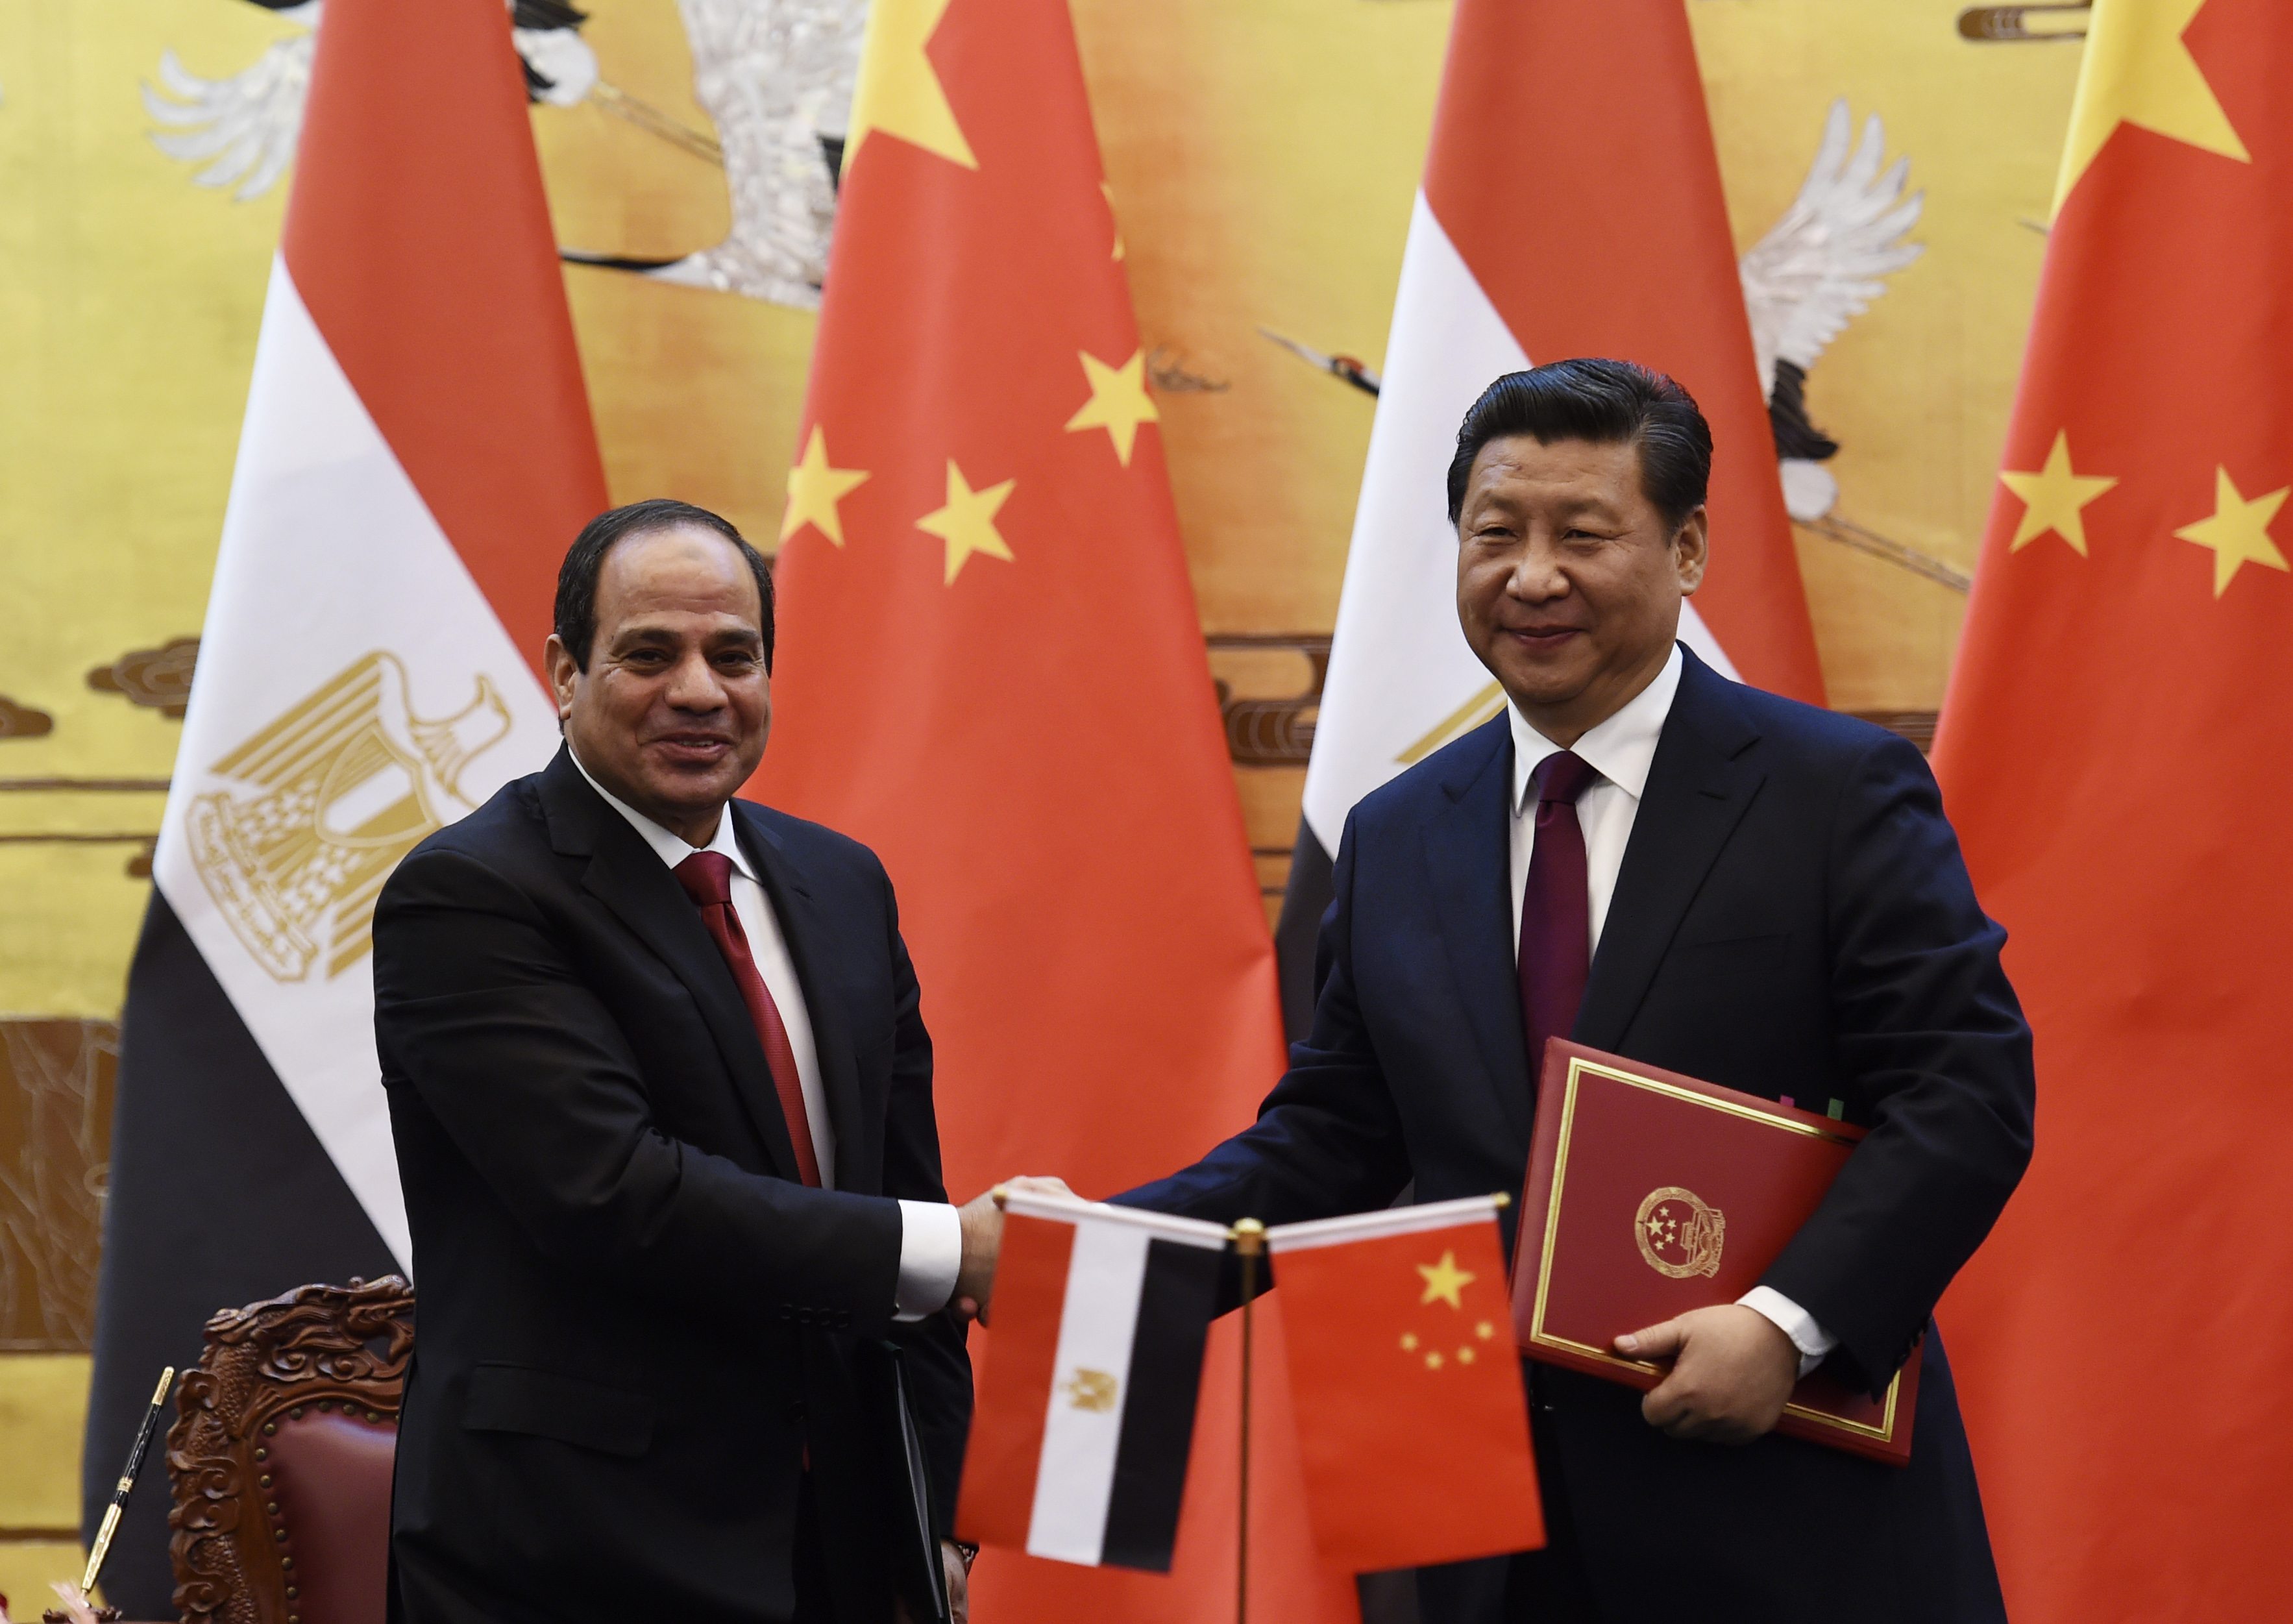 Sisi signs comprehensive partnership agreement with Chinese counterpart